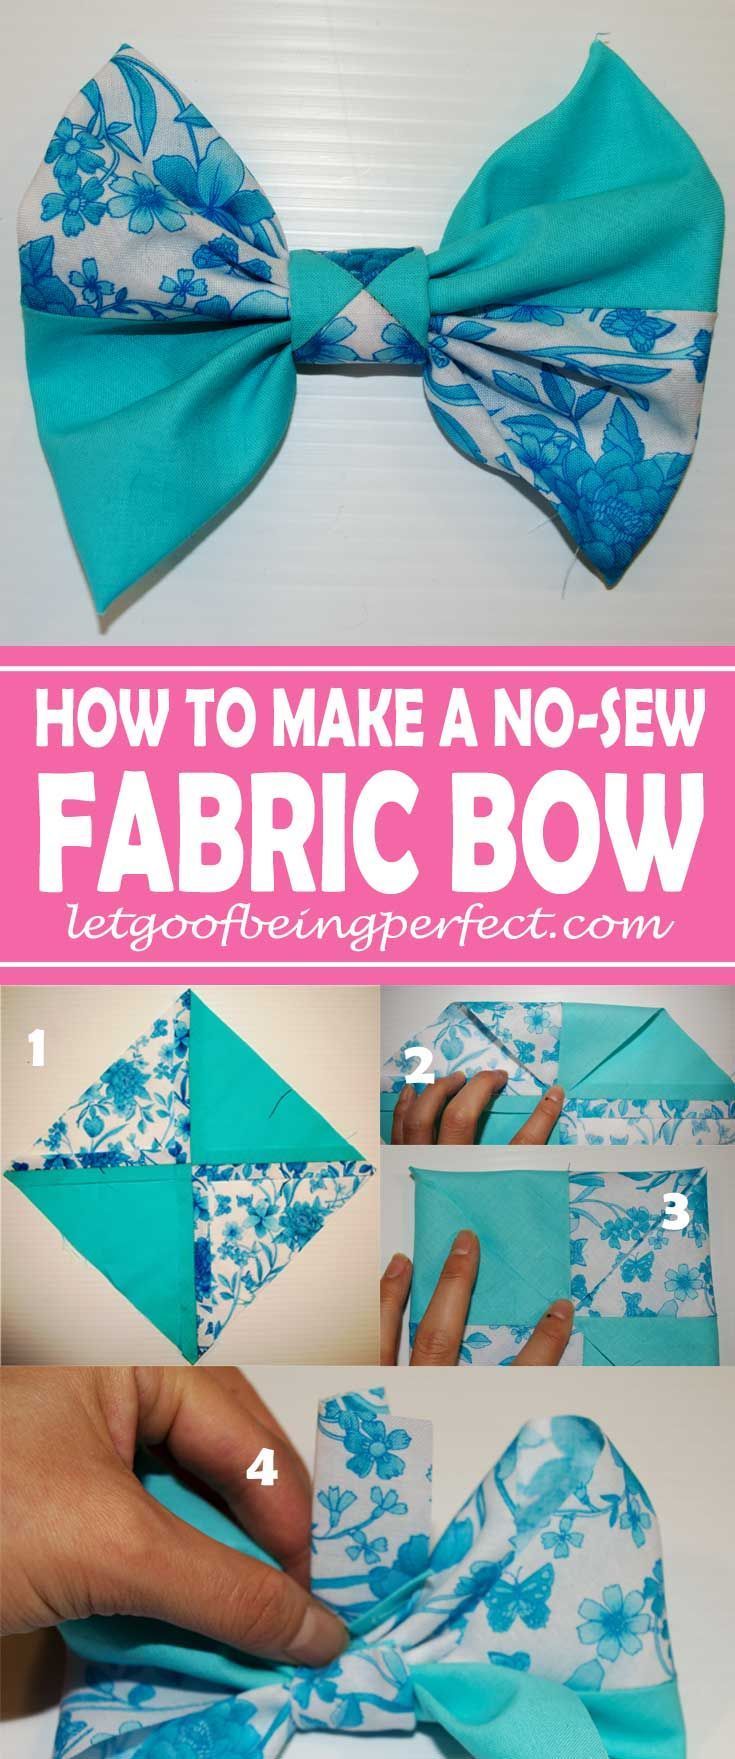 Making Fabric Bows ... Bows, Bows, Bows Everywhere! -   19 fabric crafts No Sew simple ideas